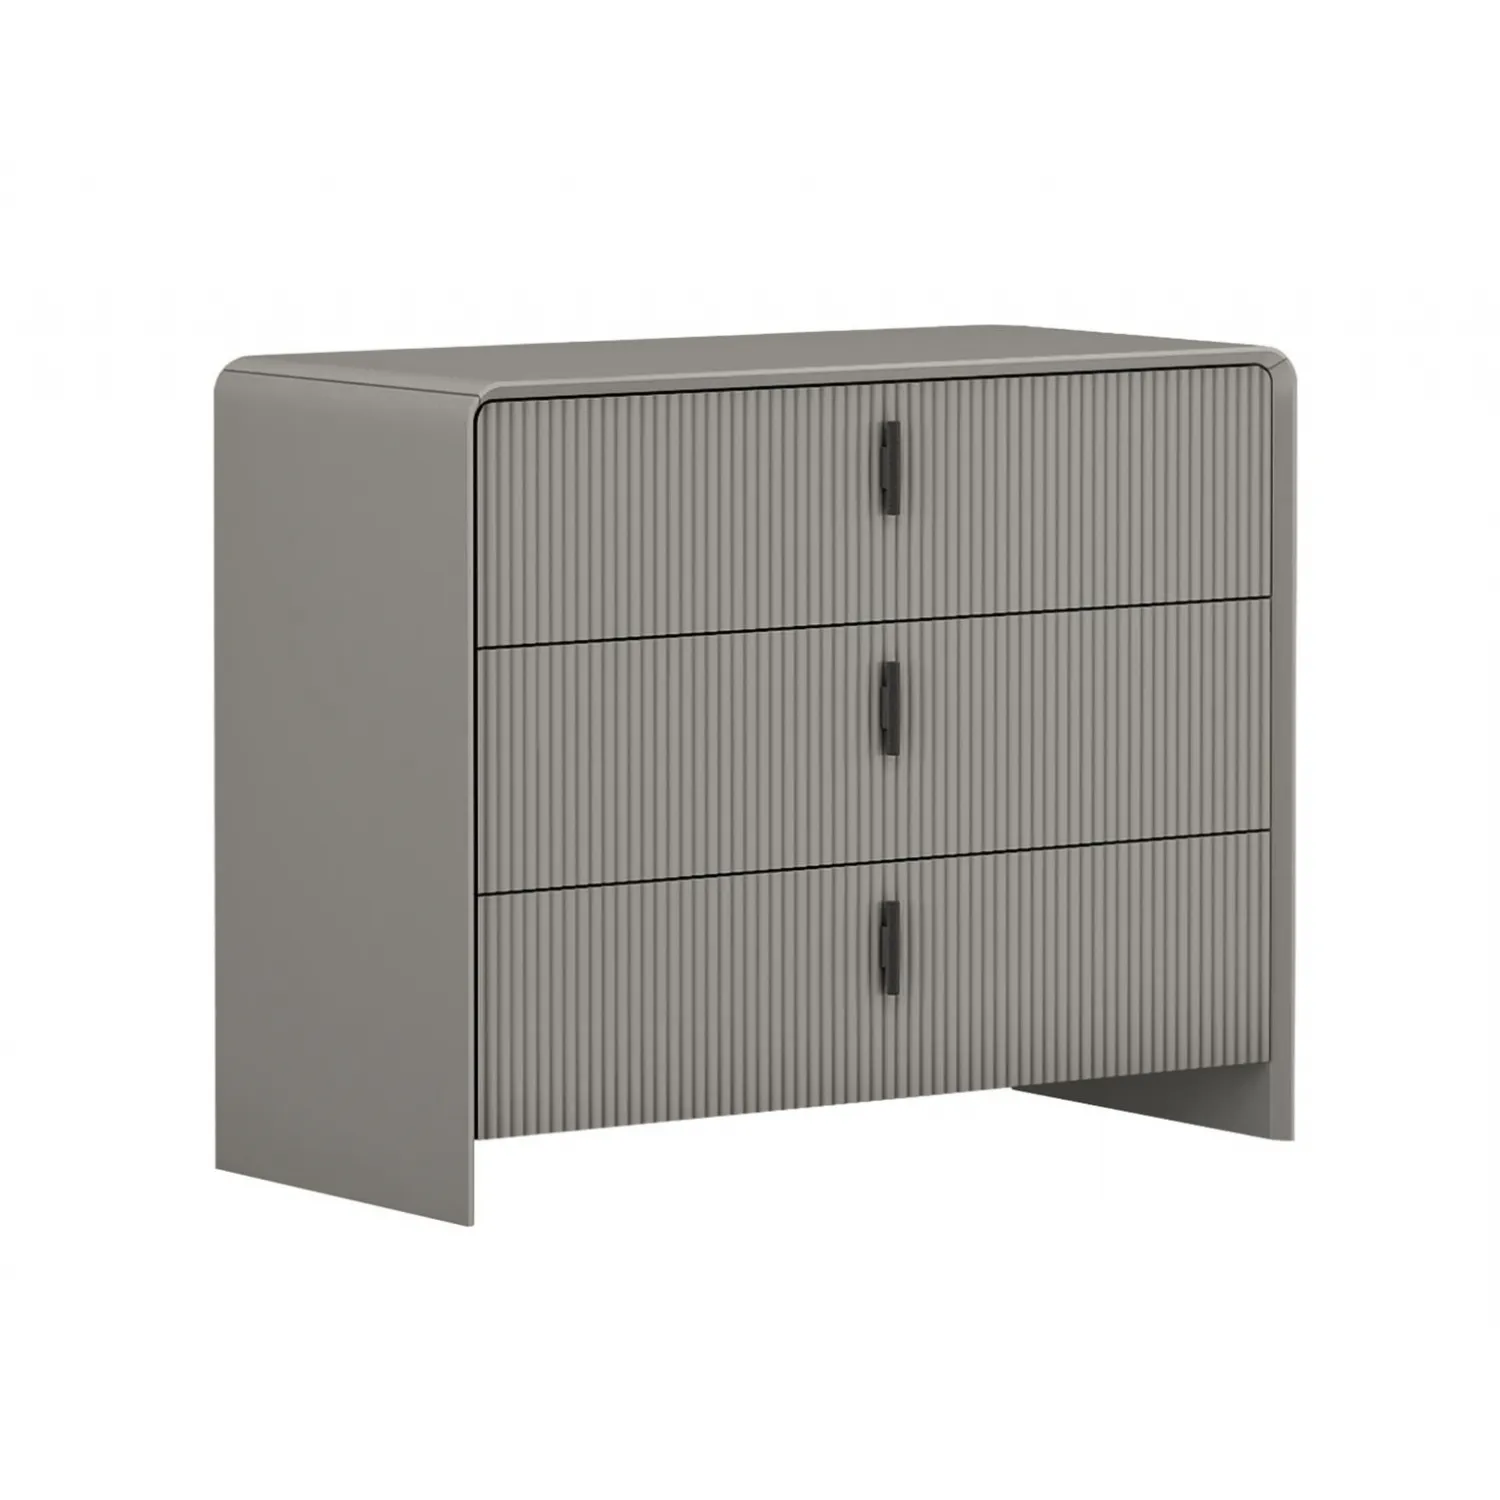 Grey Patterned Rounded Chest of 3 Drawers